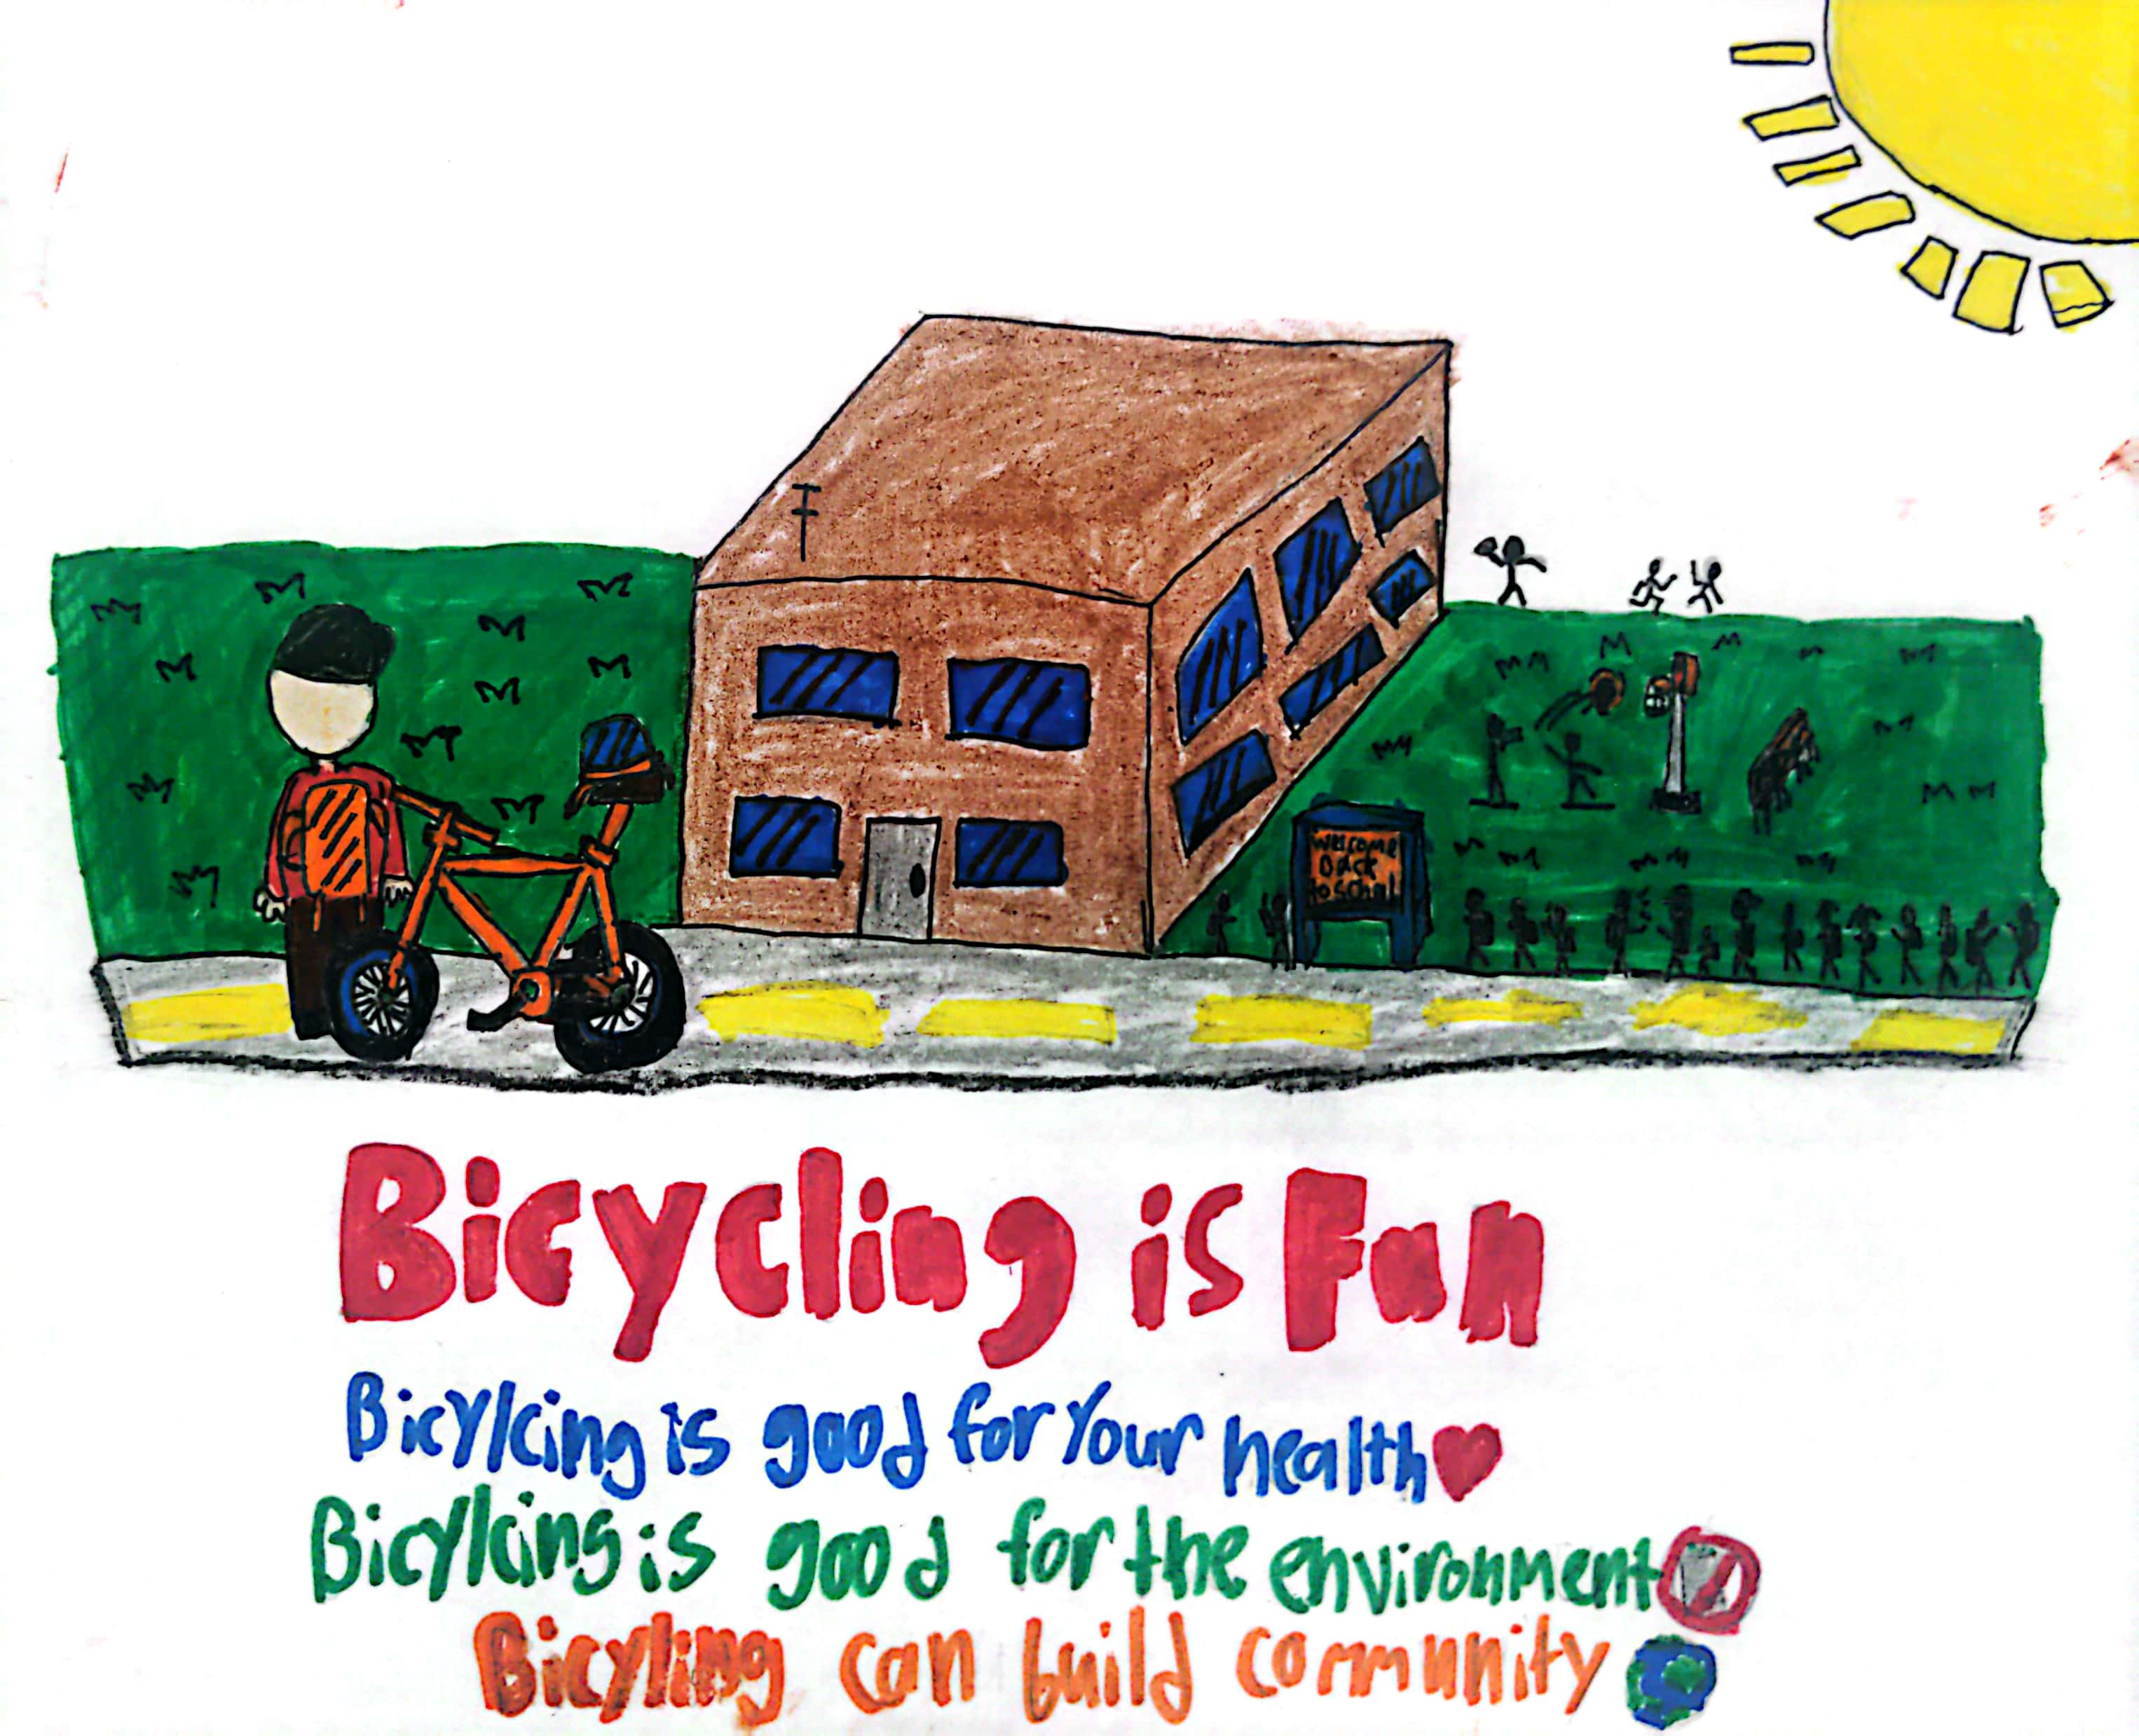 Student artwork with sun in the upper right corner, center featuring student wearing orange backpack standing next to his orange bike on path, overlooking brown school building on a green lawn where students are playing in the distance. Bottom portion reads 